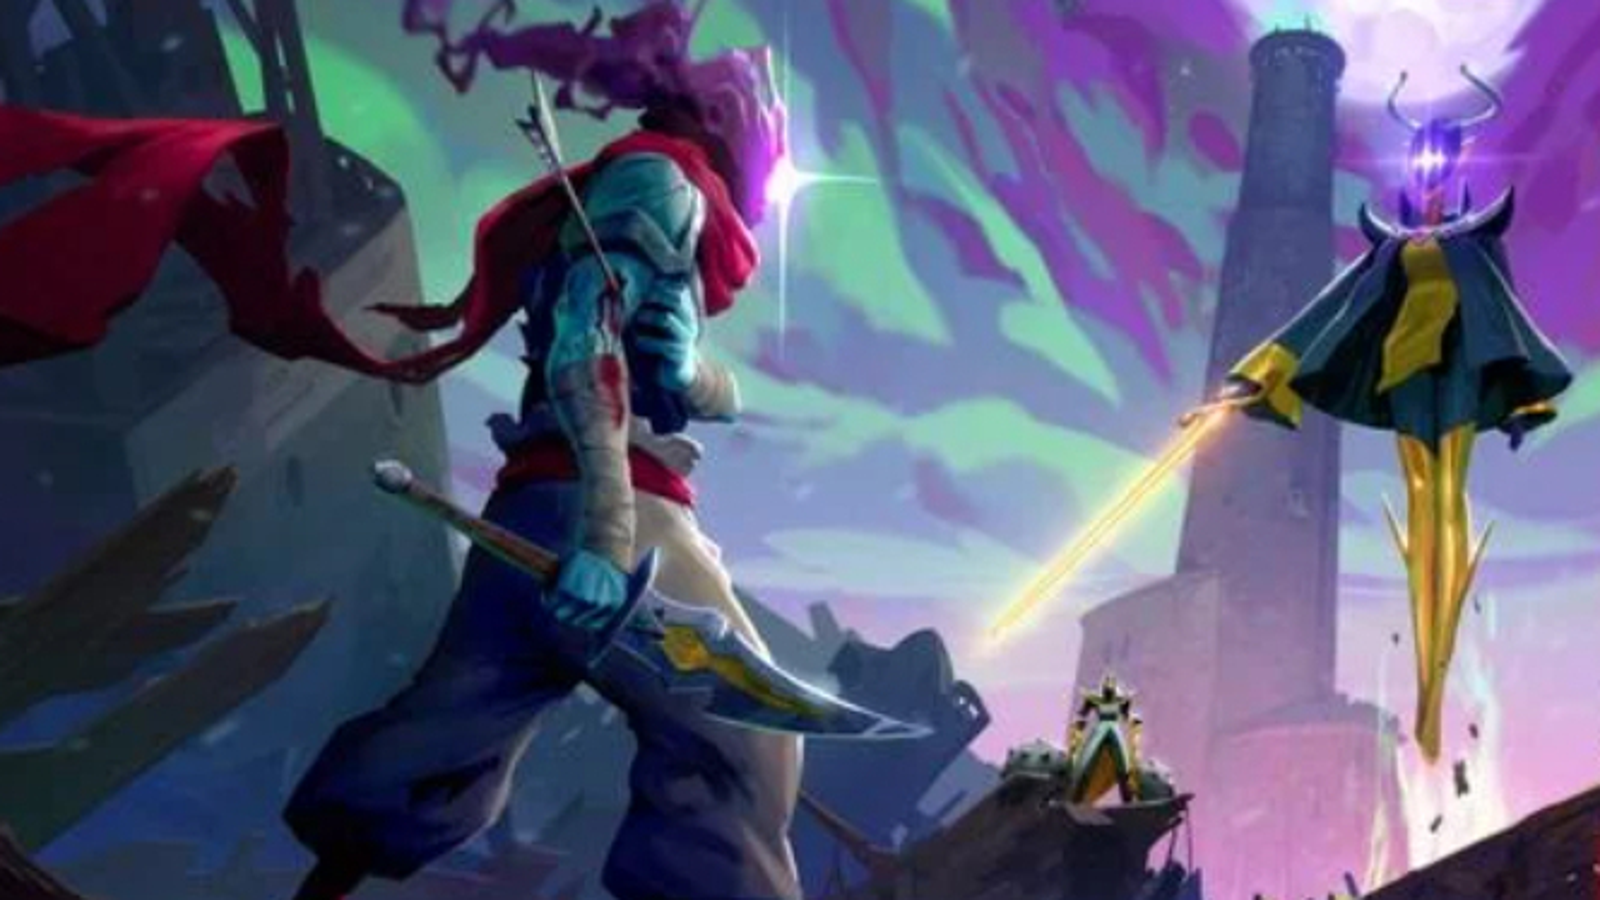 Dead Cells Animated Series Premieres Next Year - Game Informer